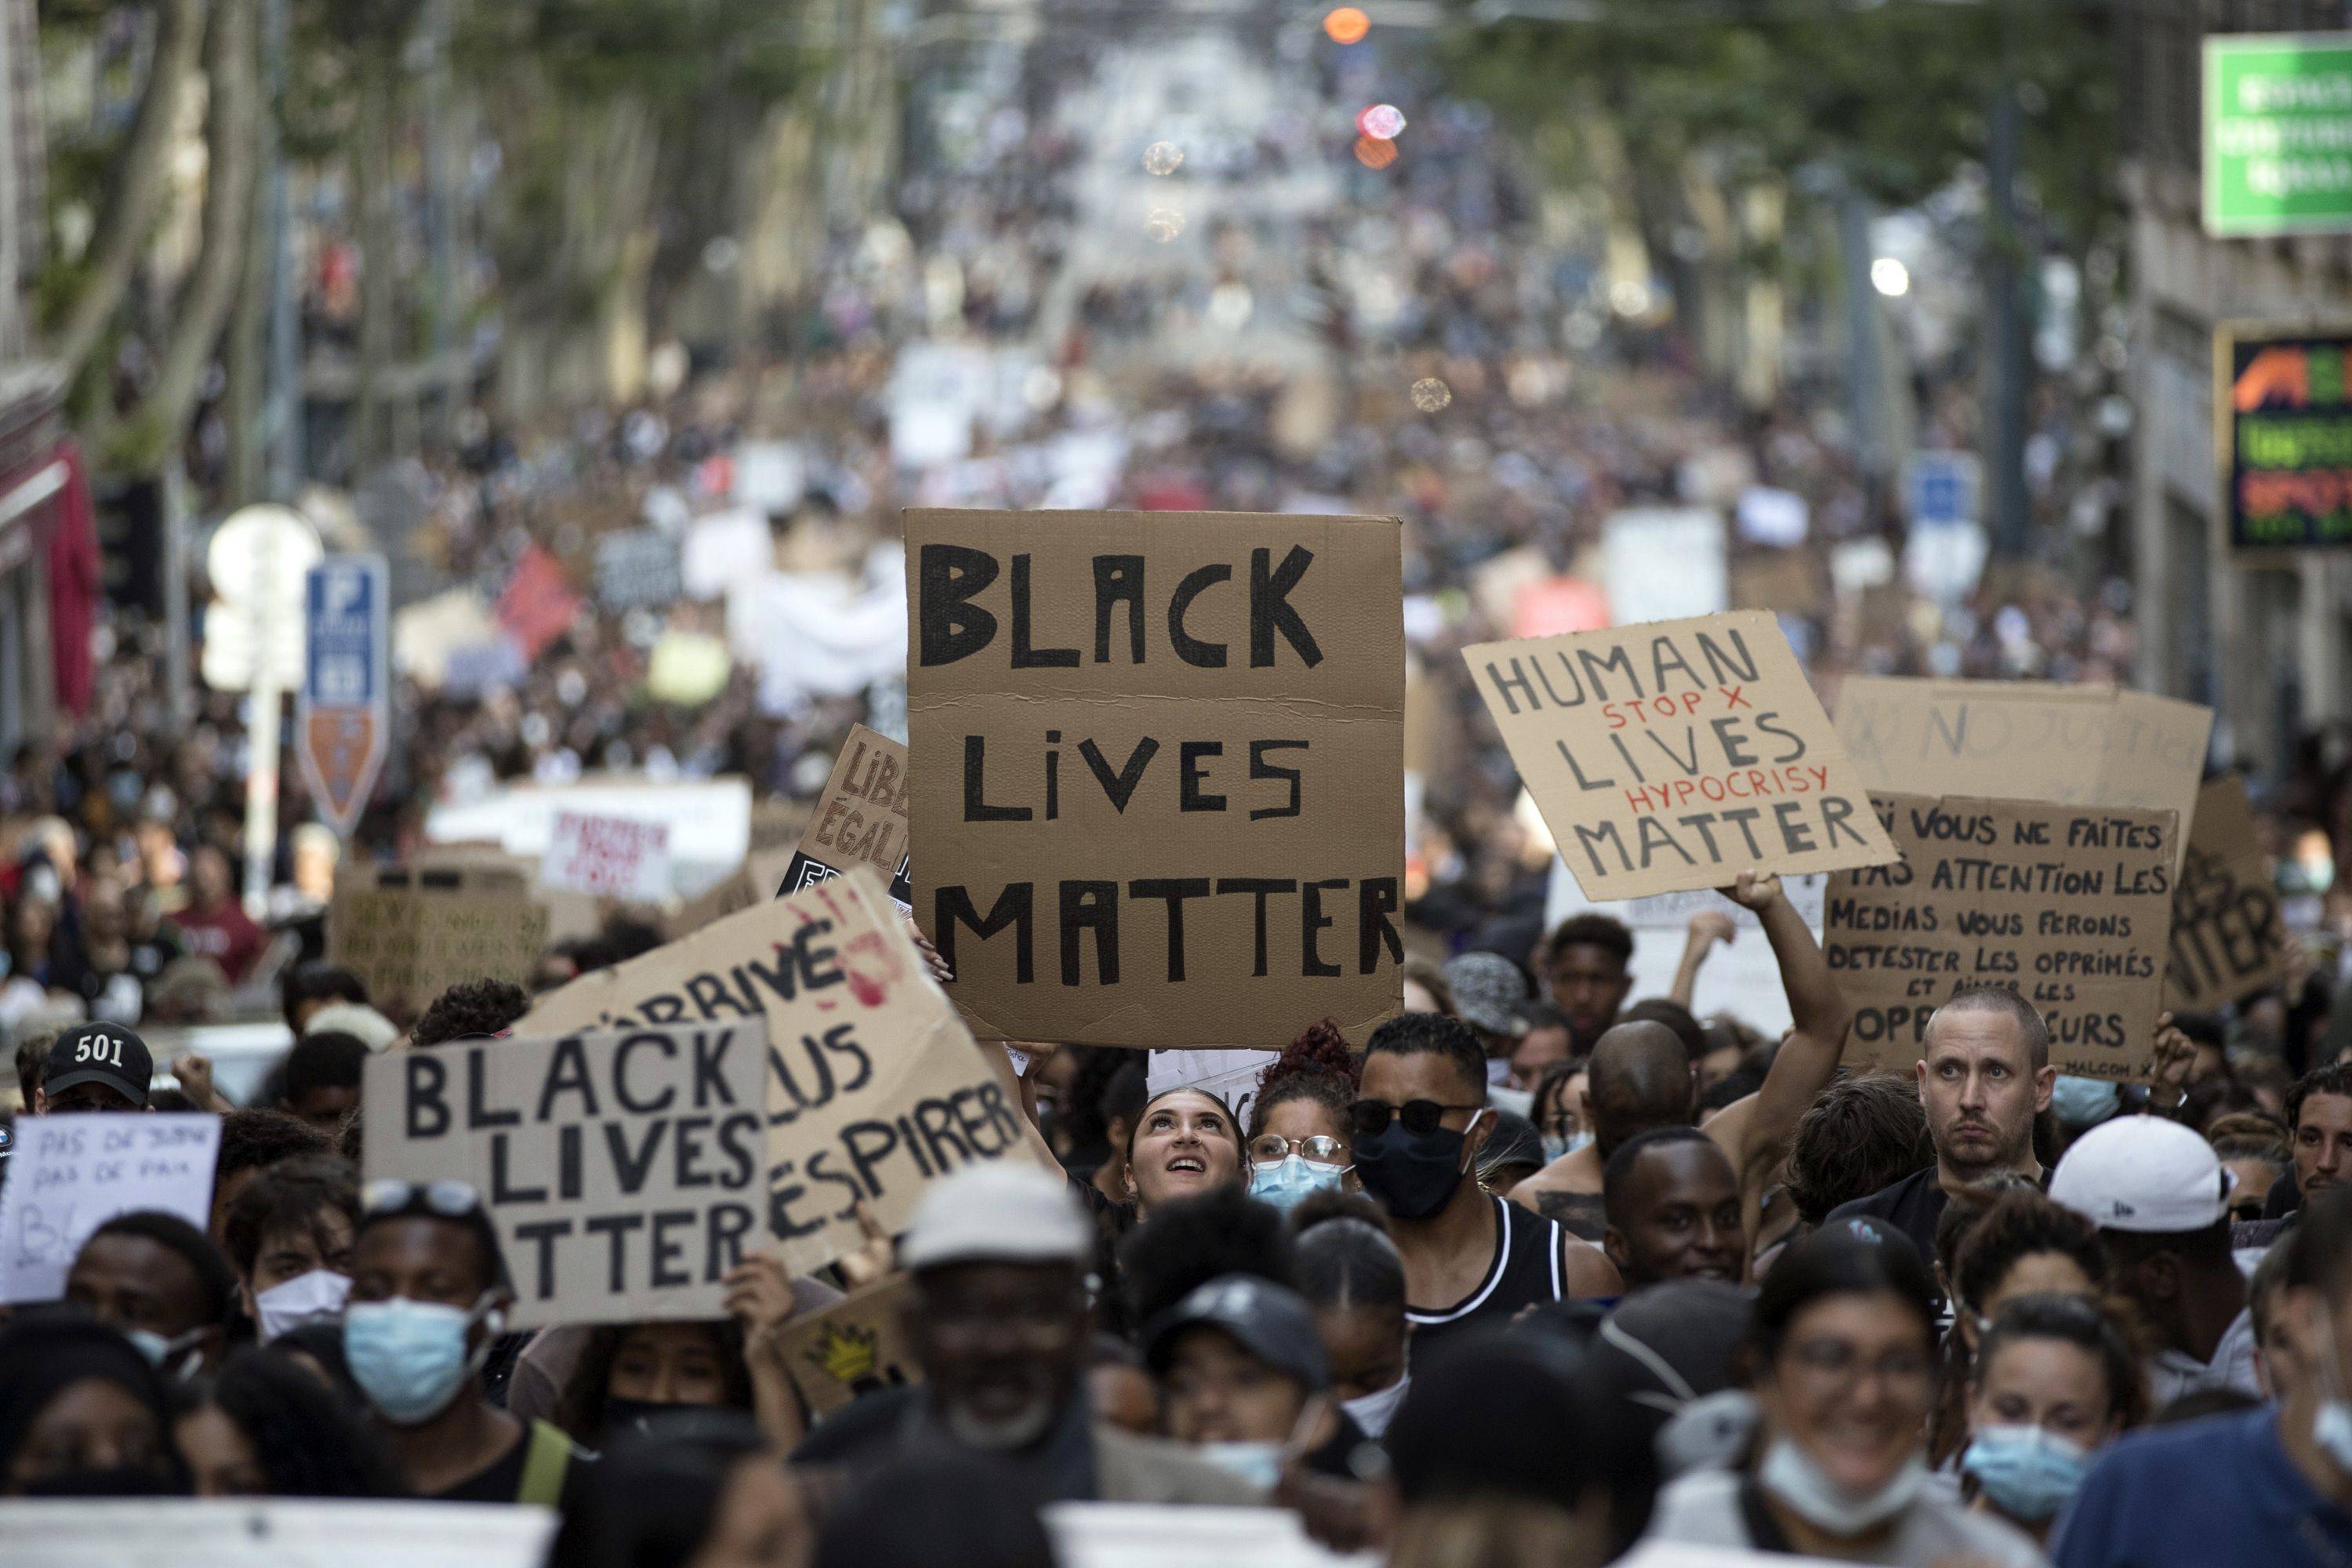 Combing through 41 million tweets to show how #BlackLivesMatter ...